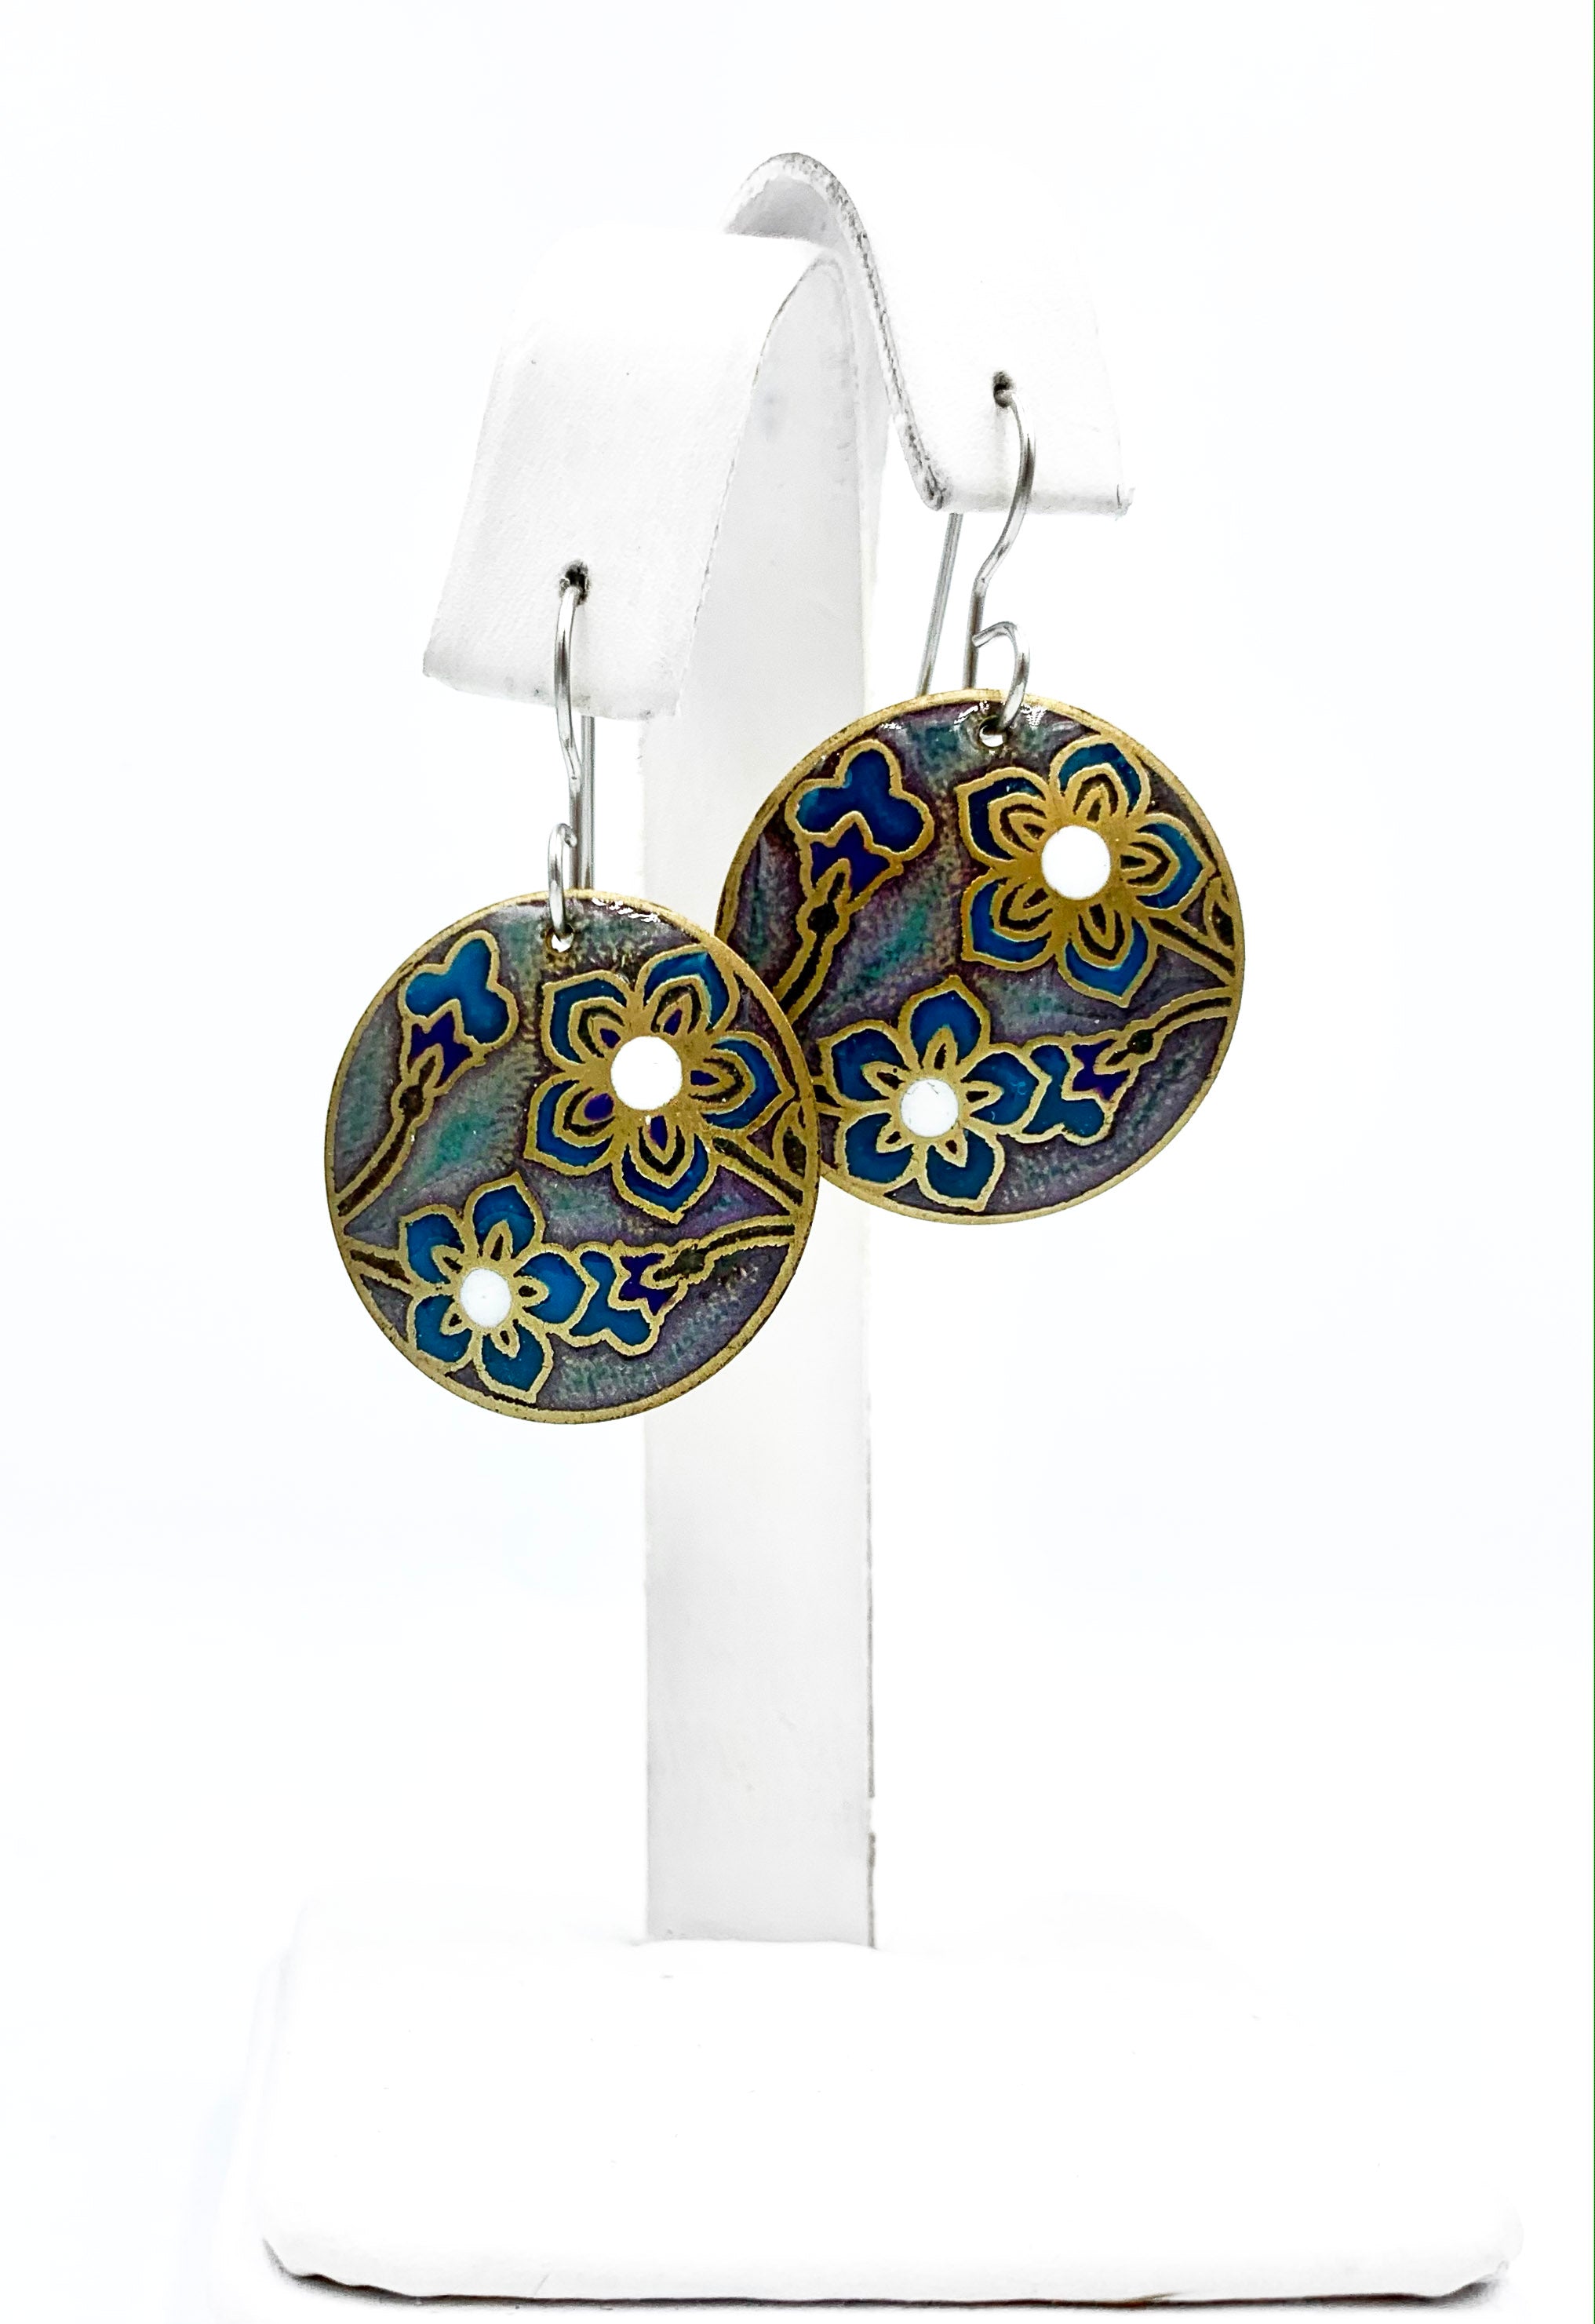 Cherry Blossom Earrings in with Iridescent Blue and Turquoise Flowers. -  Six Wings by Skrocki Design